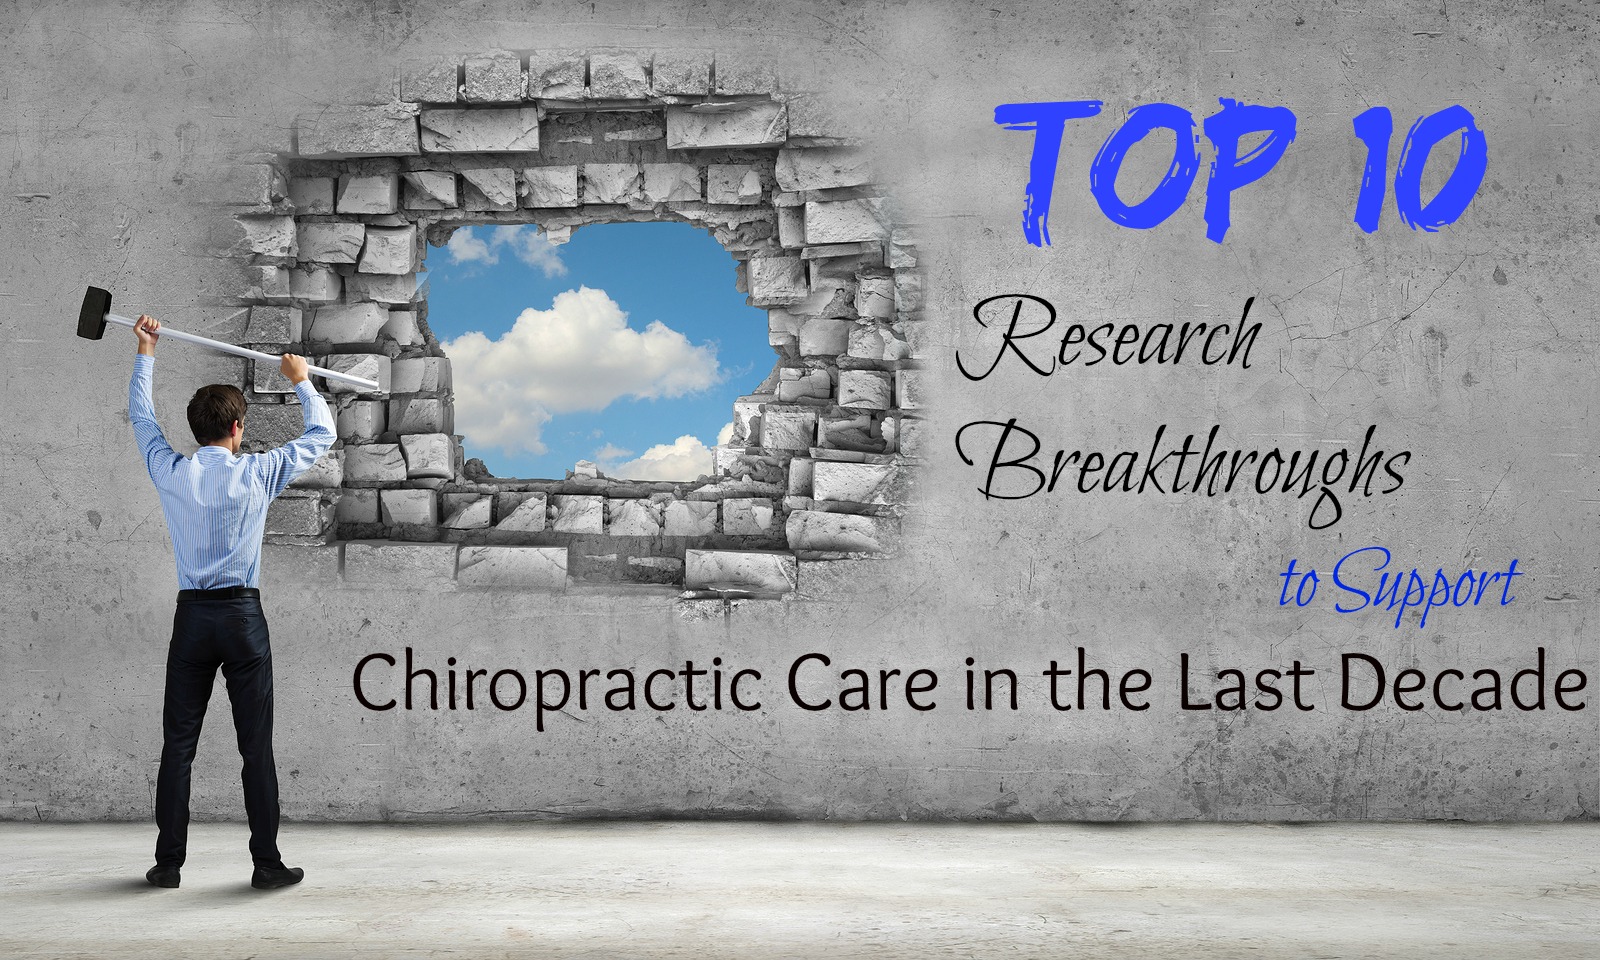 Top 10 Research Breakthroughs to Support Chiropractic Care in the 